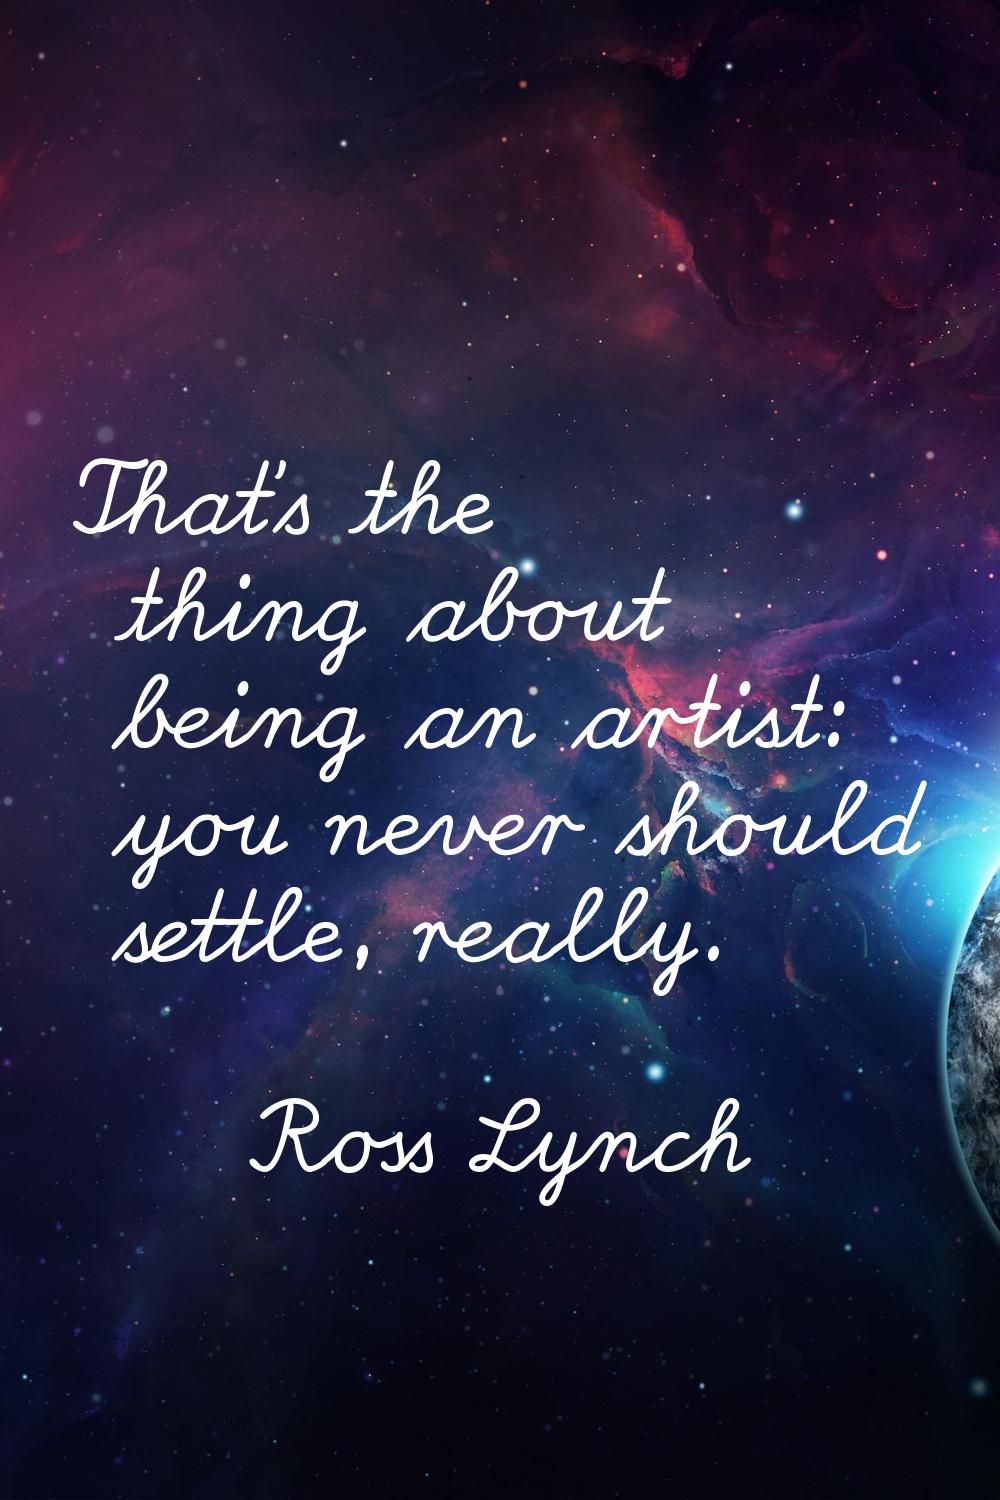 That's the thing about being an artist: you never should settle, really.